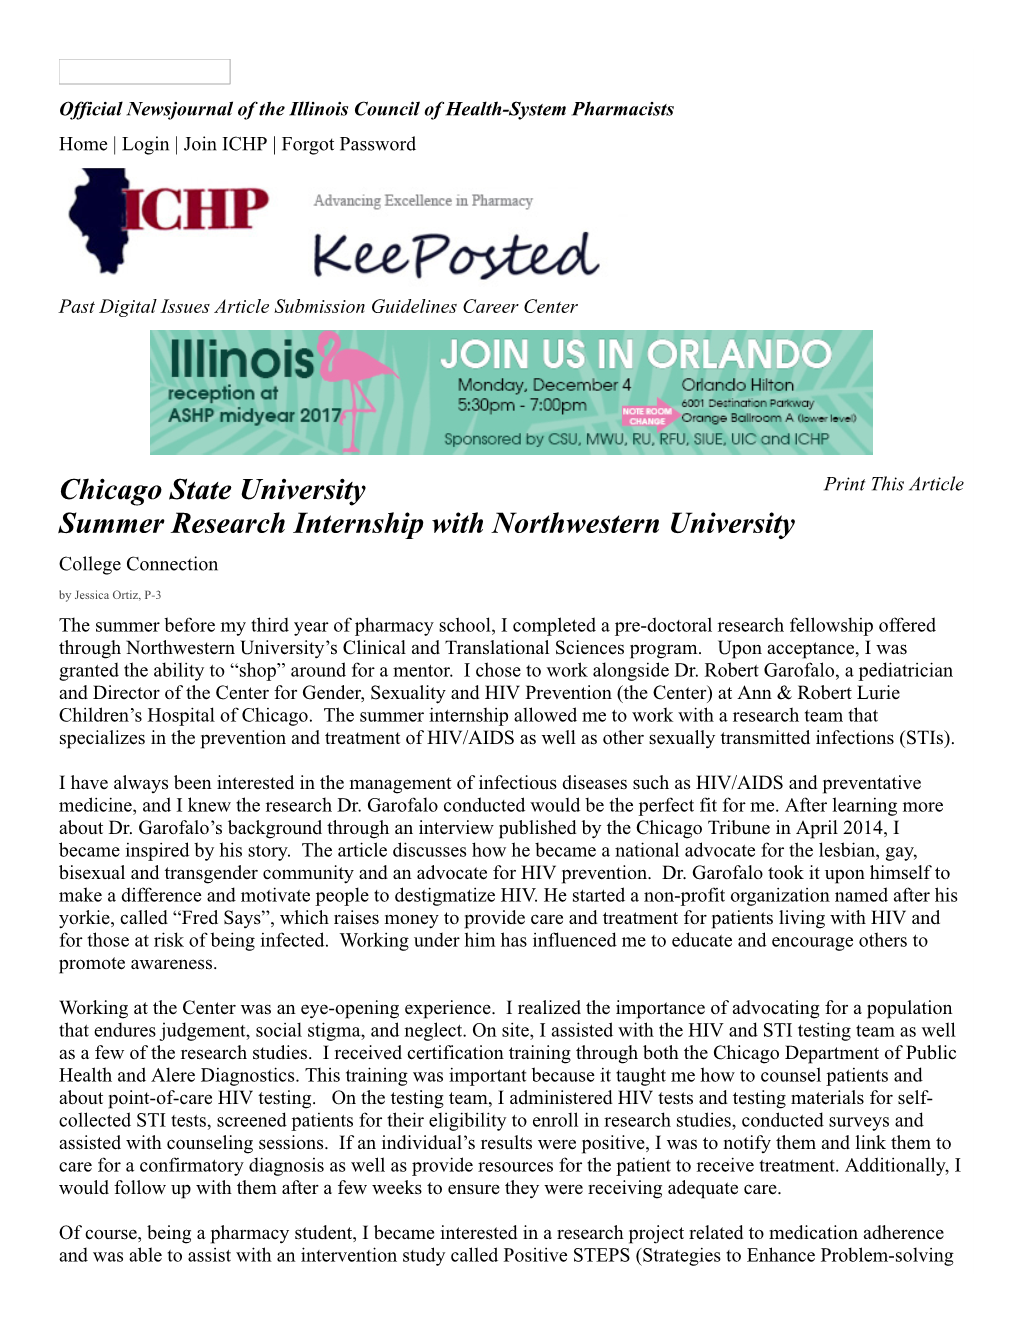 Chicago State University Summer Research Internship With